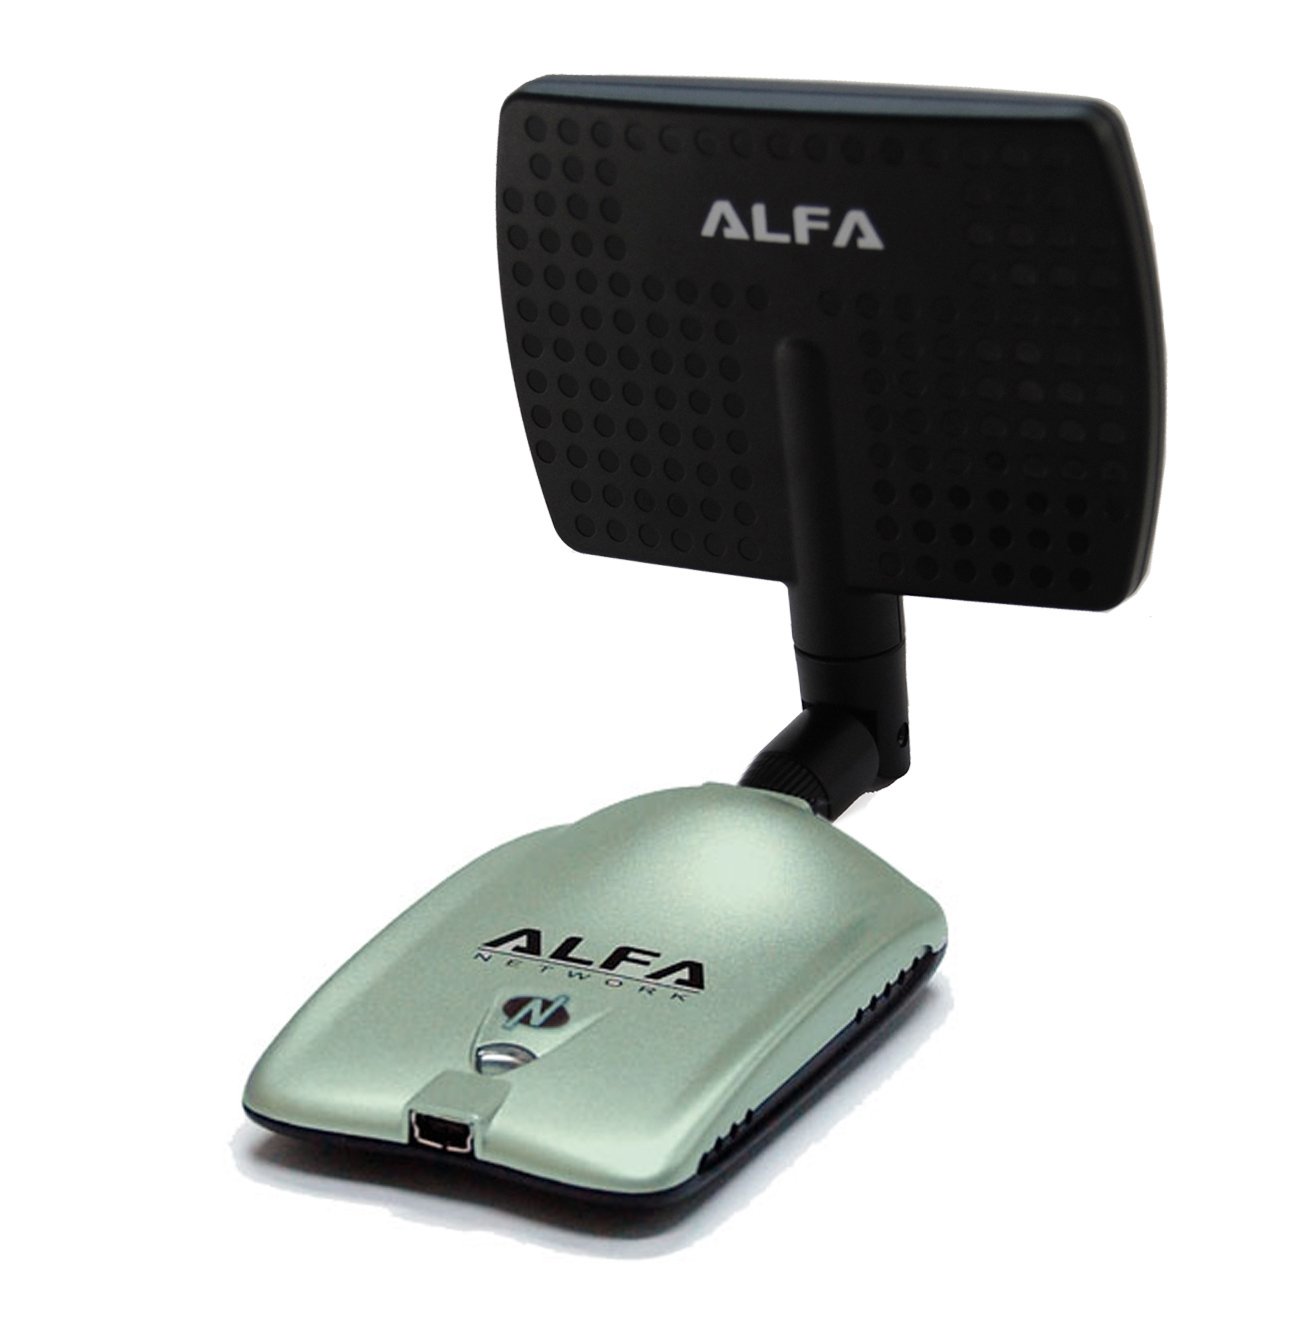 Alfa awus036h usb wireless adapter driver for mac